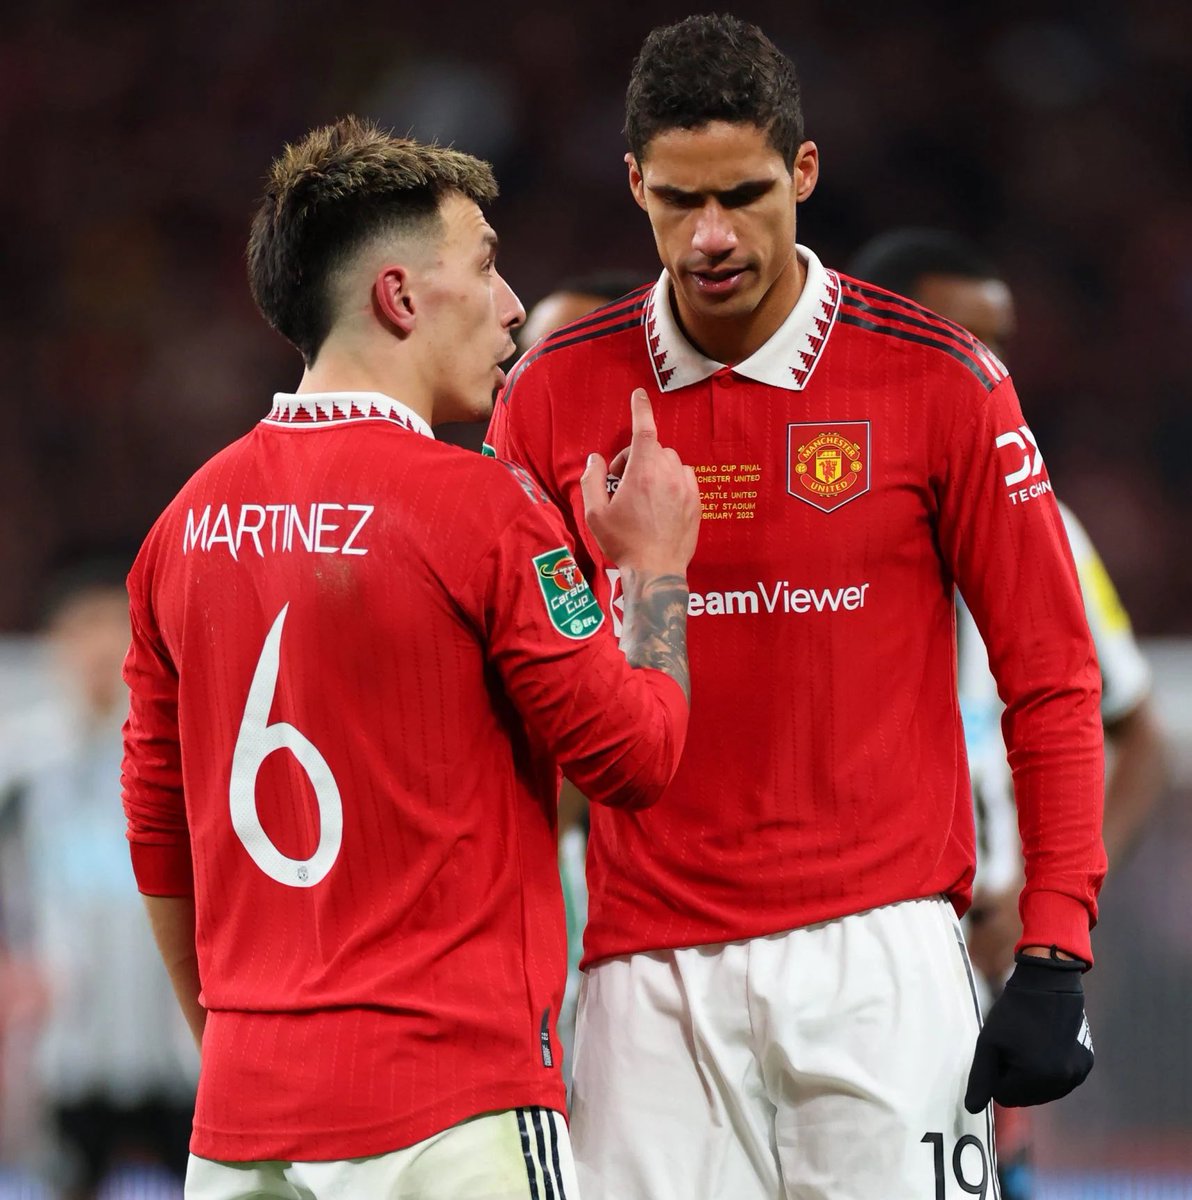 Undoubtably the best CB partnership we’ve seen at United since Rio x Vidic, the main reason we were successful last season Please.. for old times sake run it back for the FA Cup final and let Varane have the send off he deserves ❤️